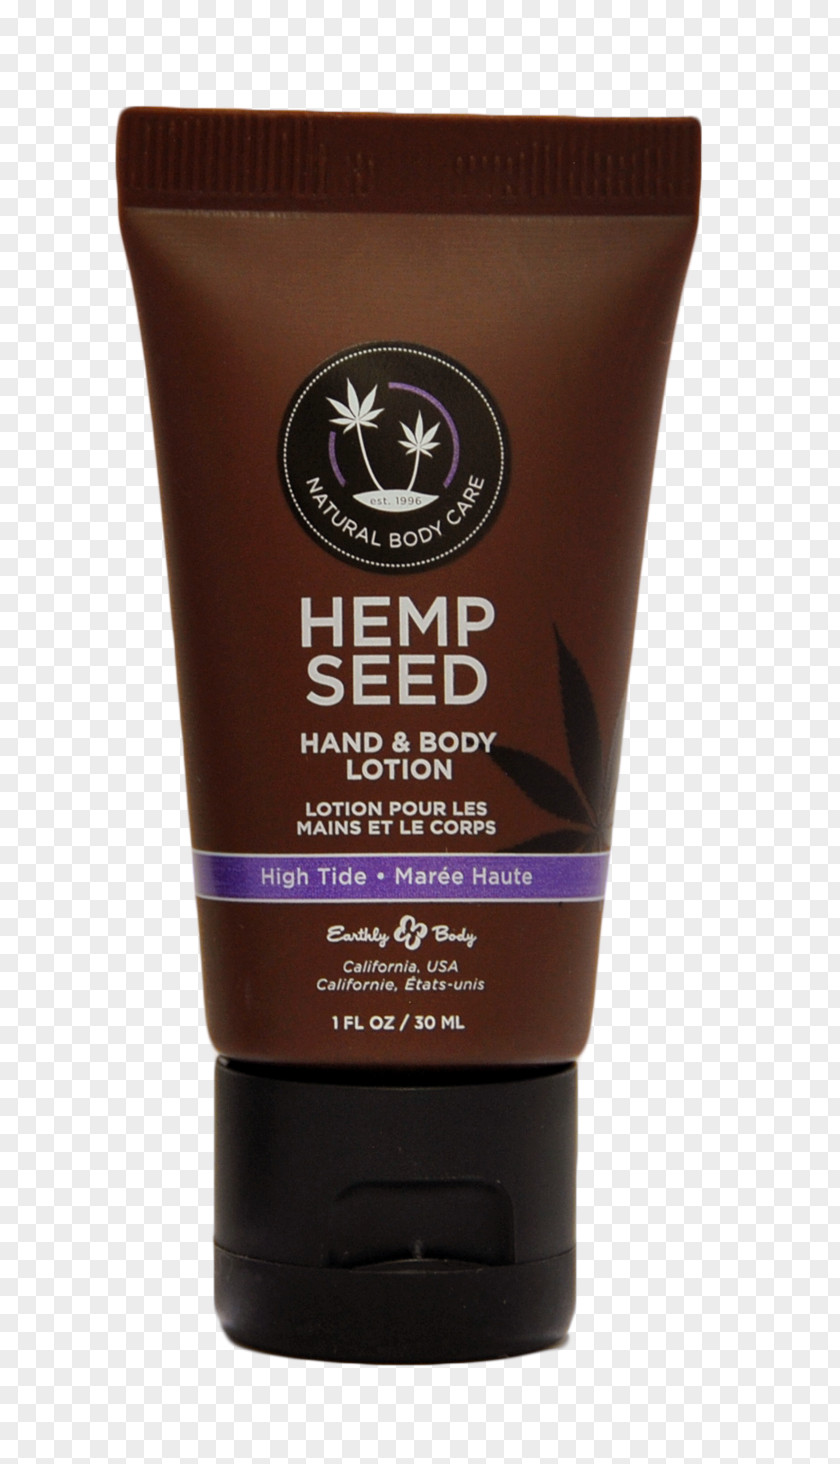 Oil Earthly Body Hemp Seed Hand & Lotion Cream PNG